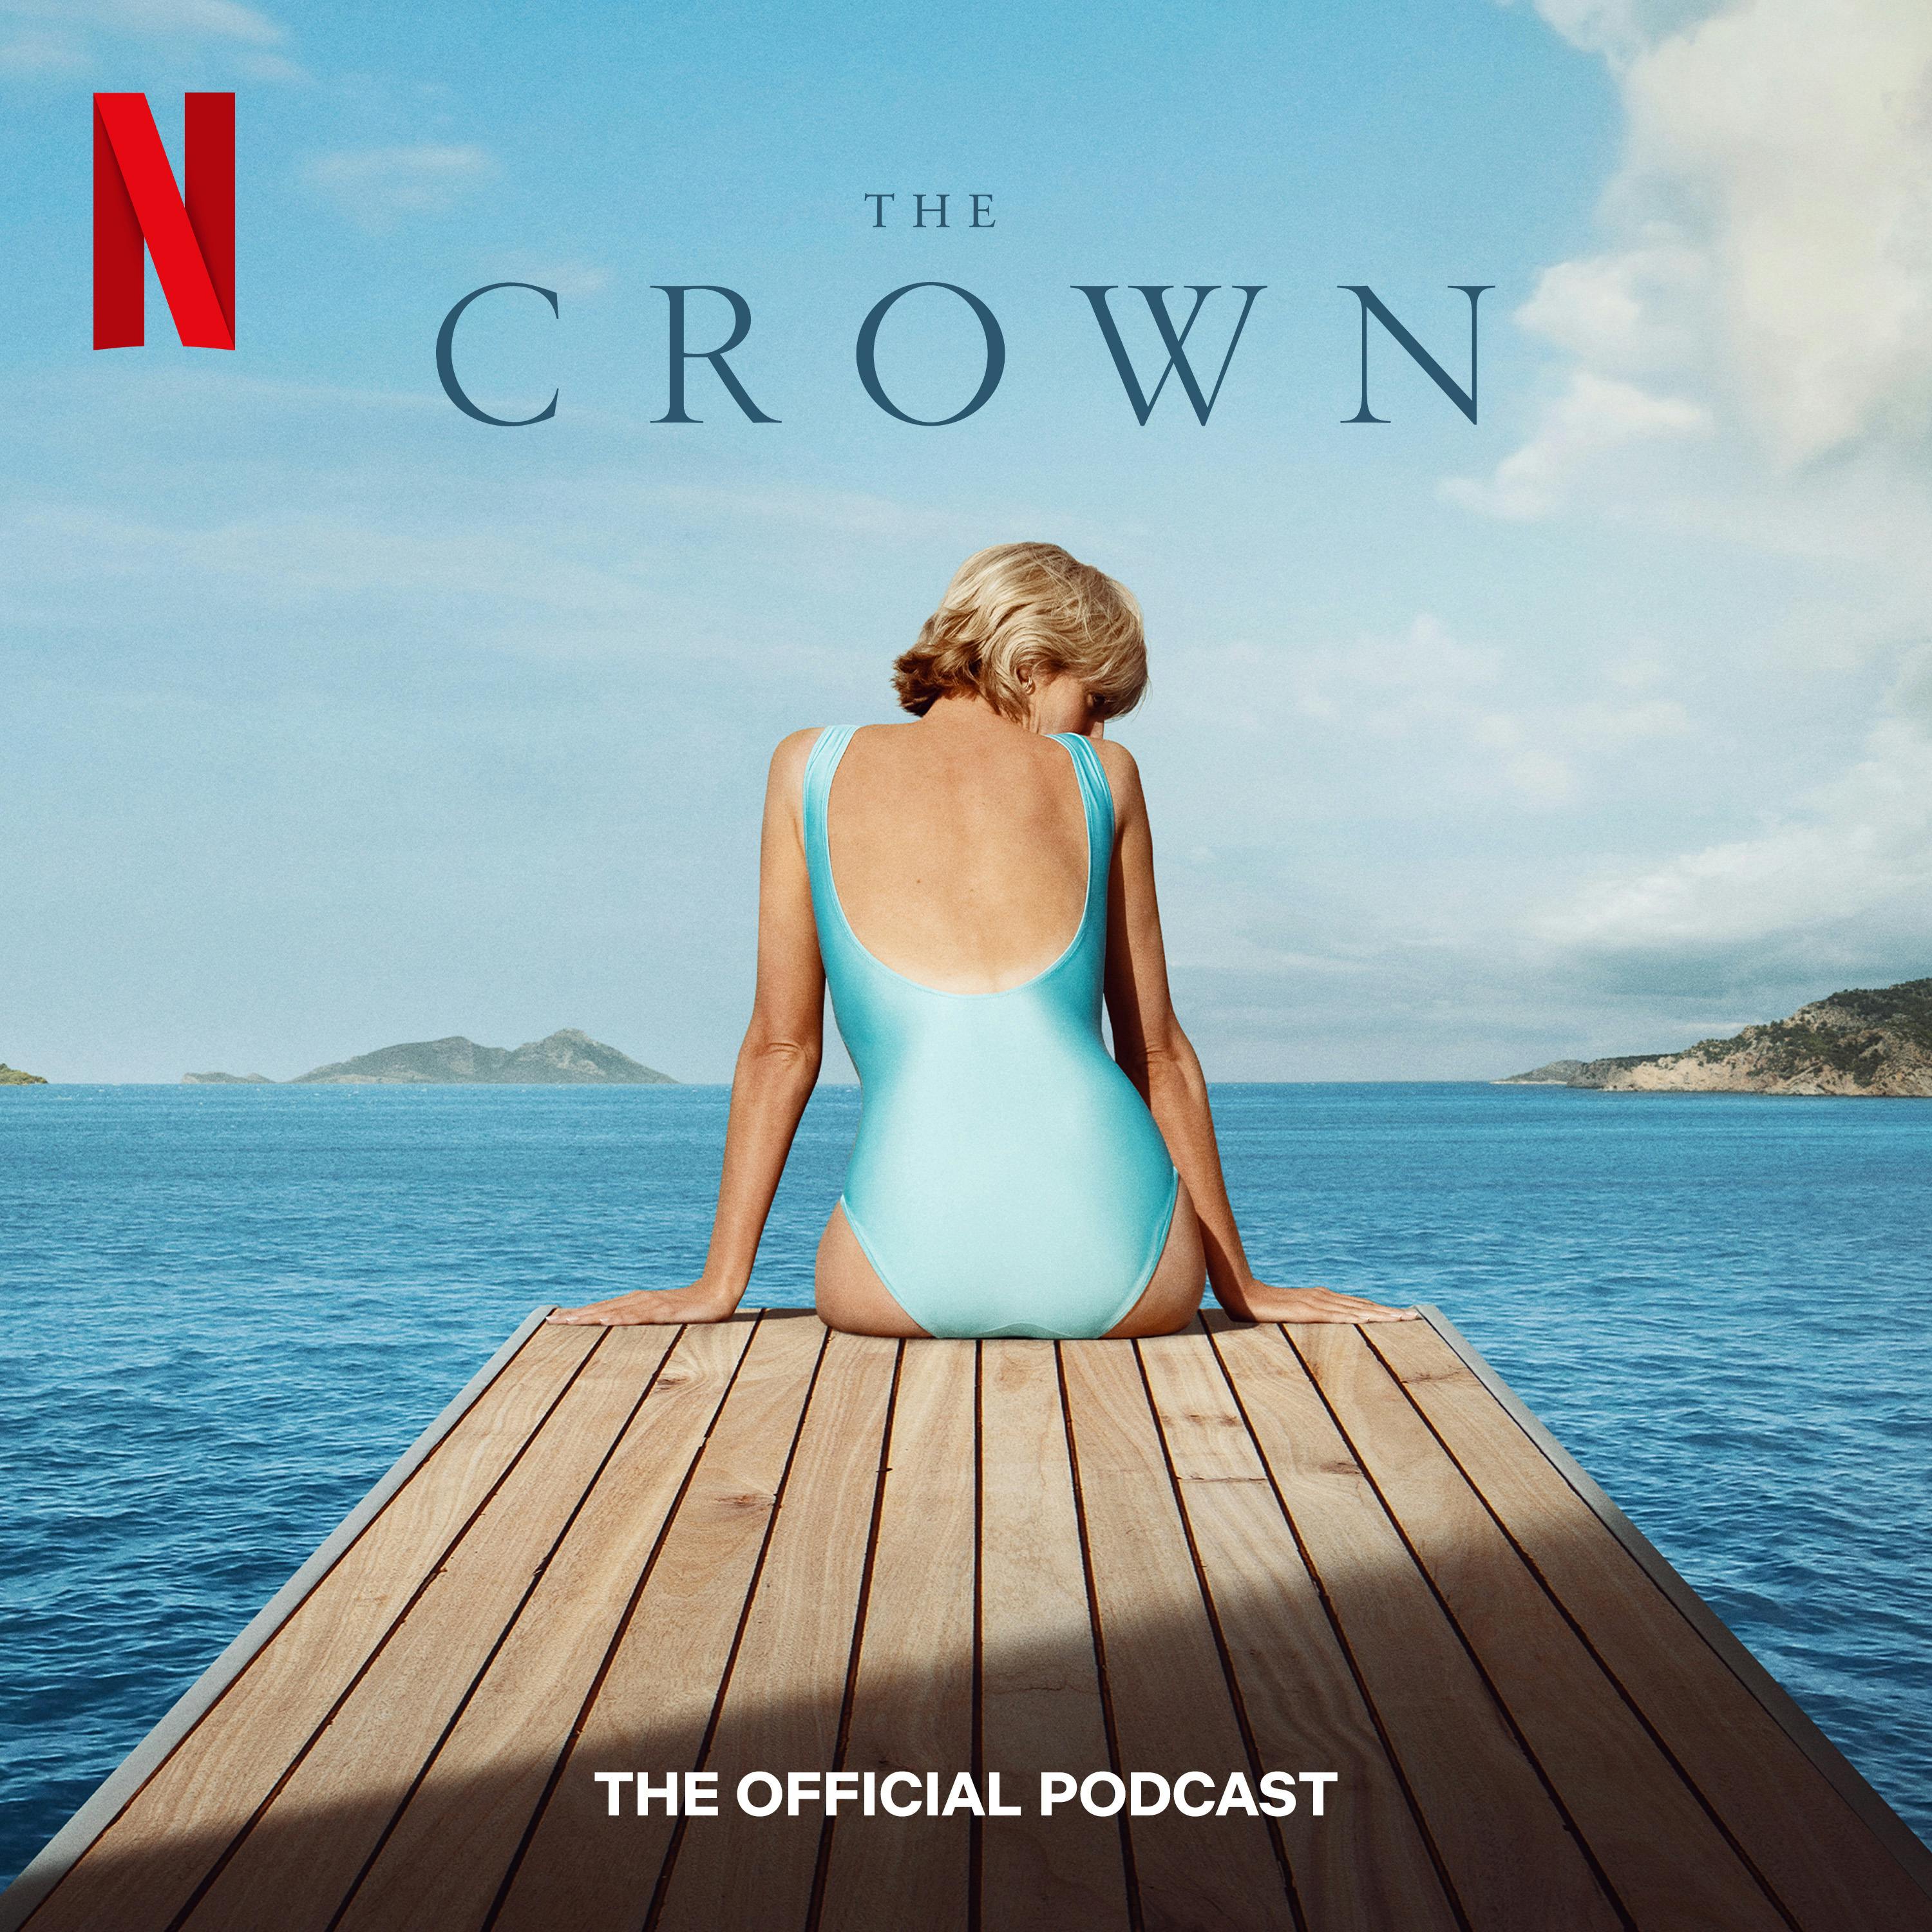 The Crown: The Official Podcast podcast show image